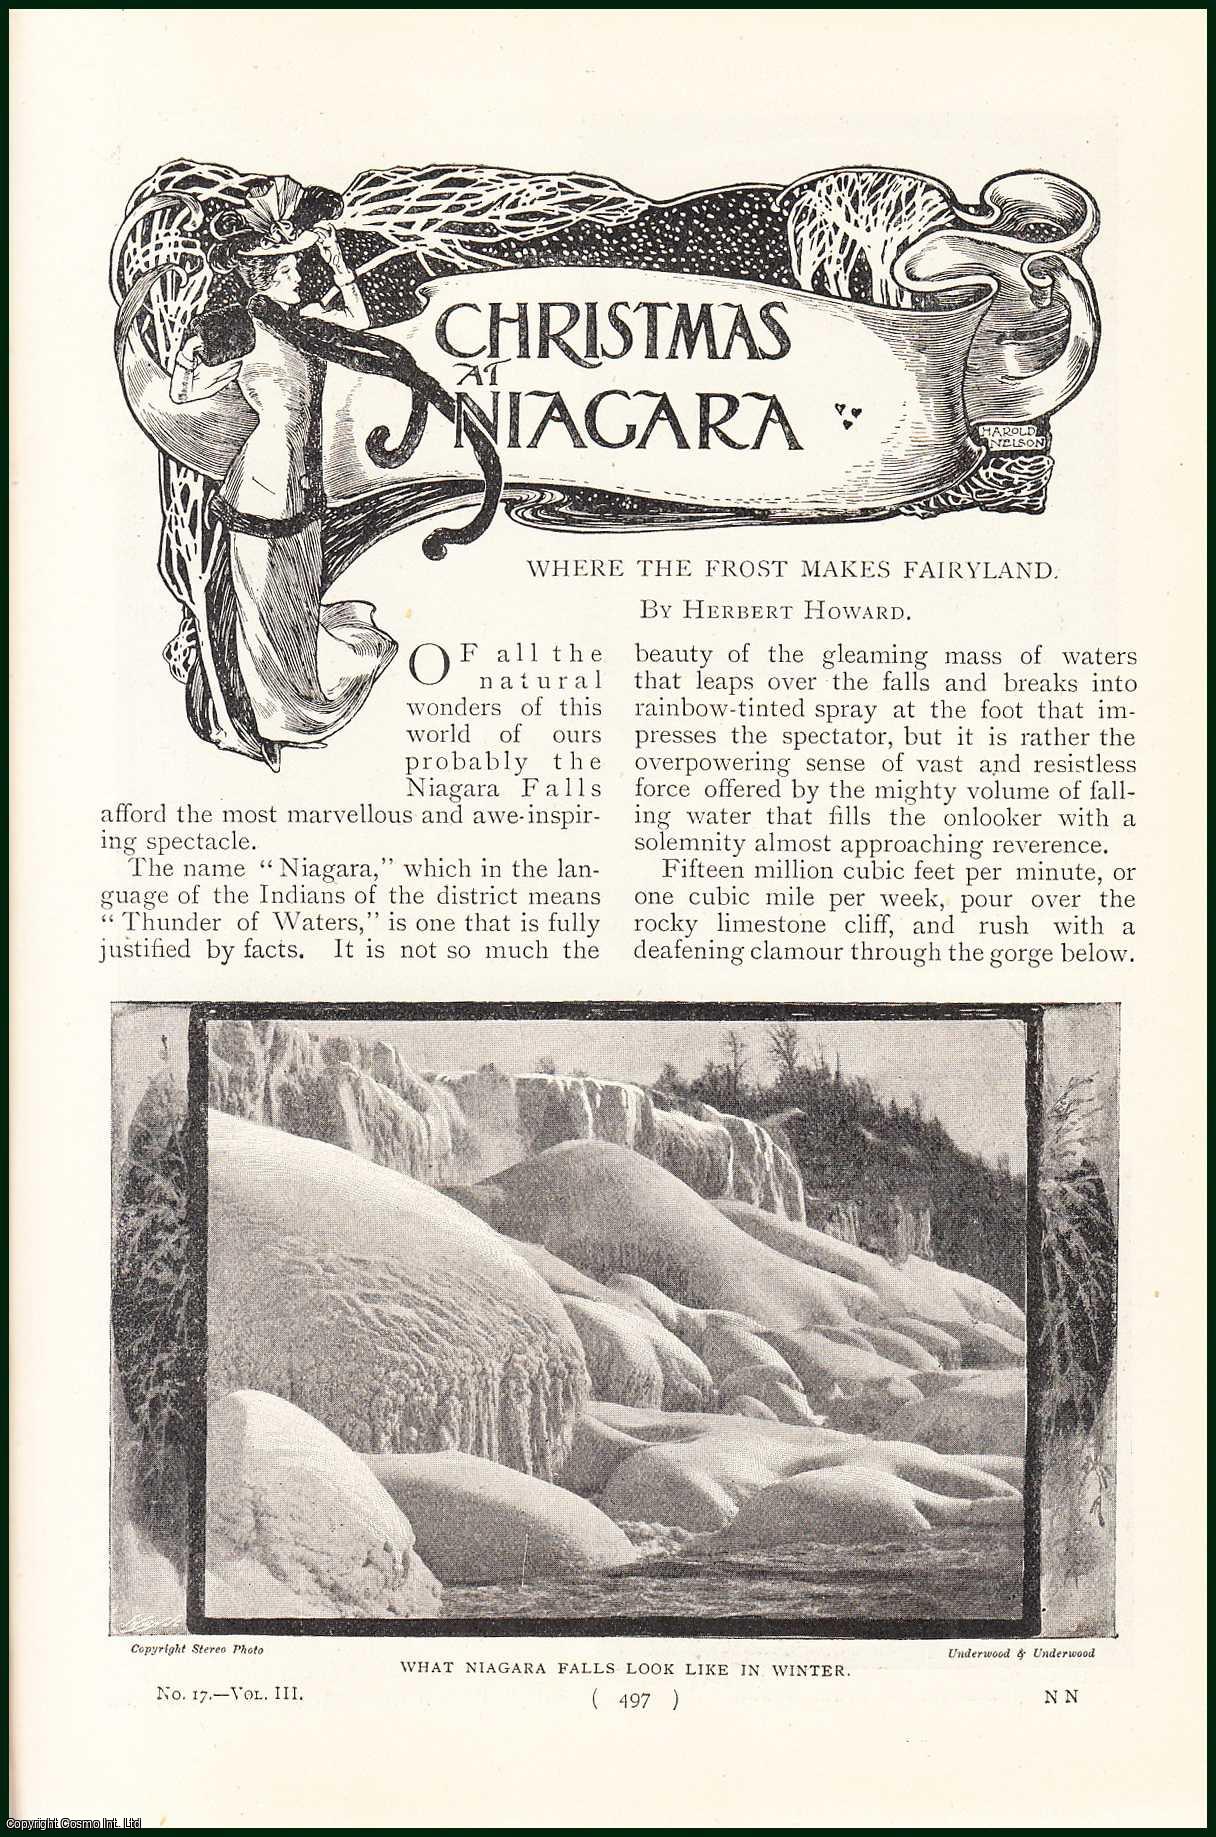 Herbert Howard - Christmas at Niagara Falls. Where The Frost Makes Fairyland. An uncommon original article from the Harmsworth London Magazine, 1900.